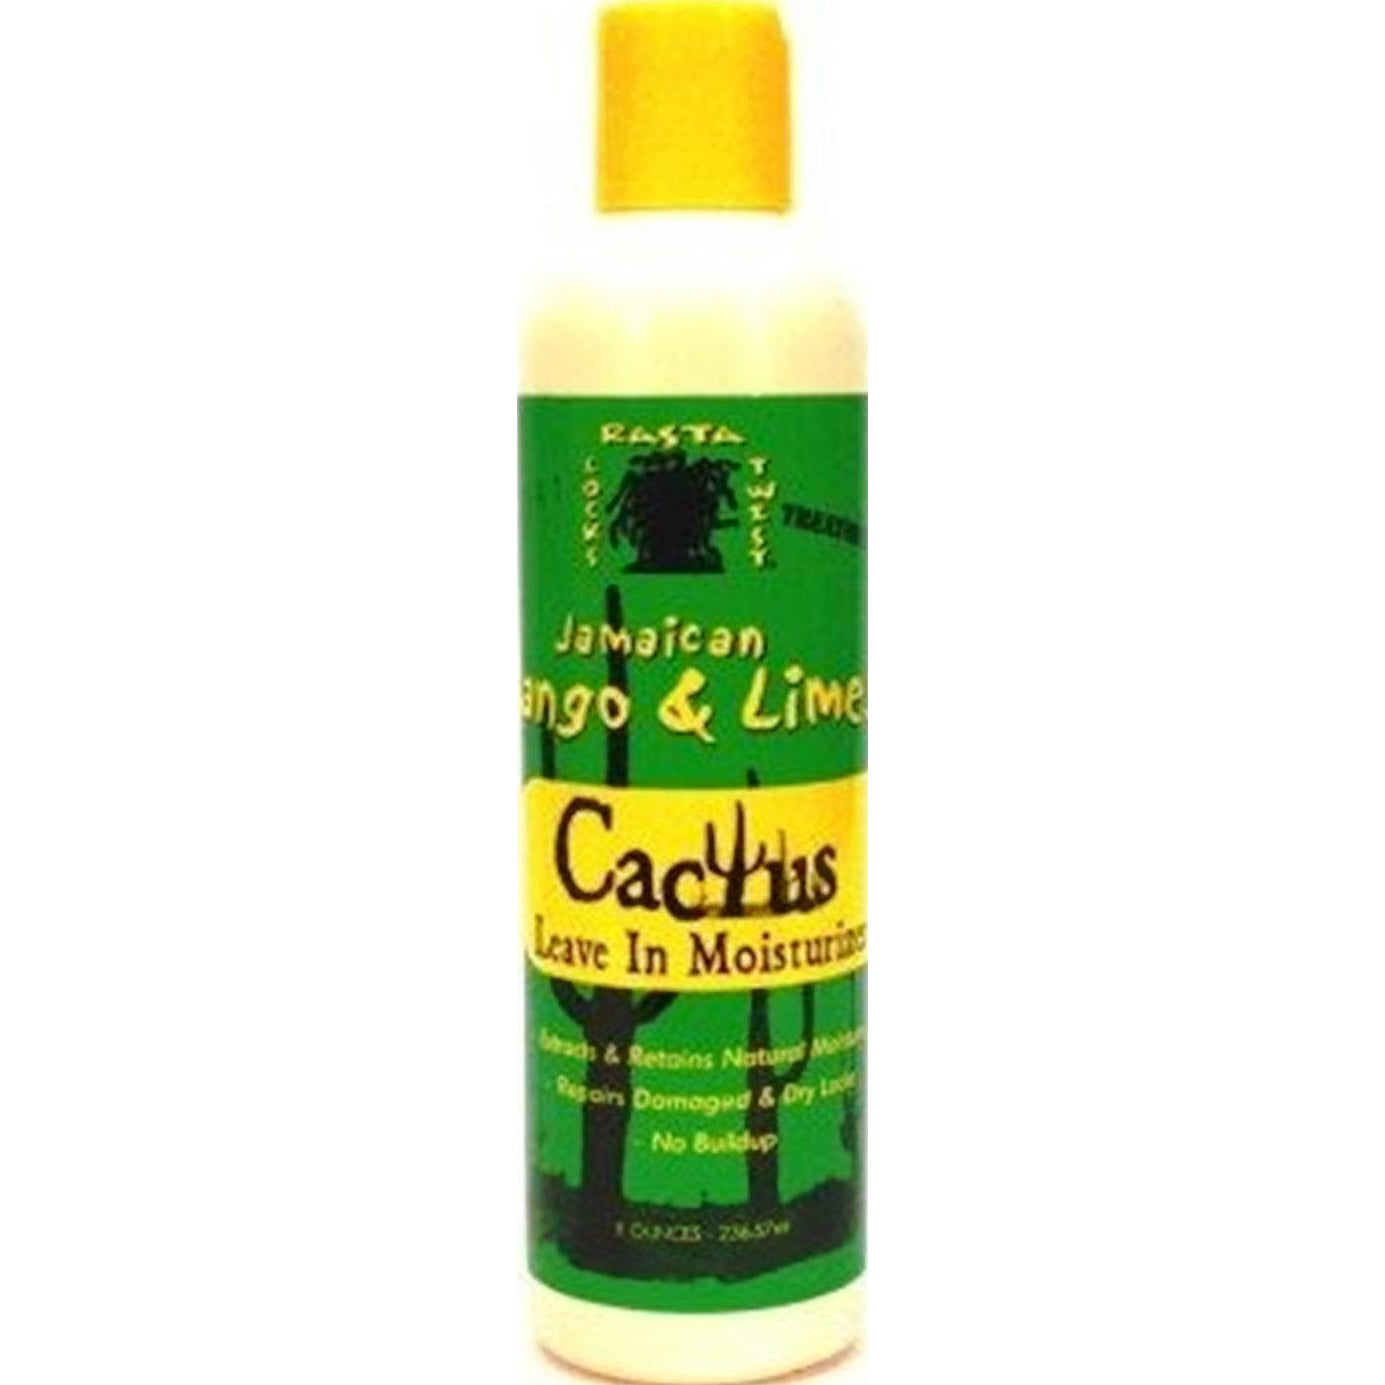 Jamaican Mango And Lime Cactus Leave-In Moisturizer, 8 Ounce